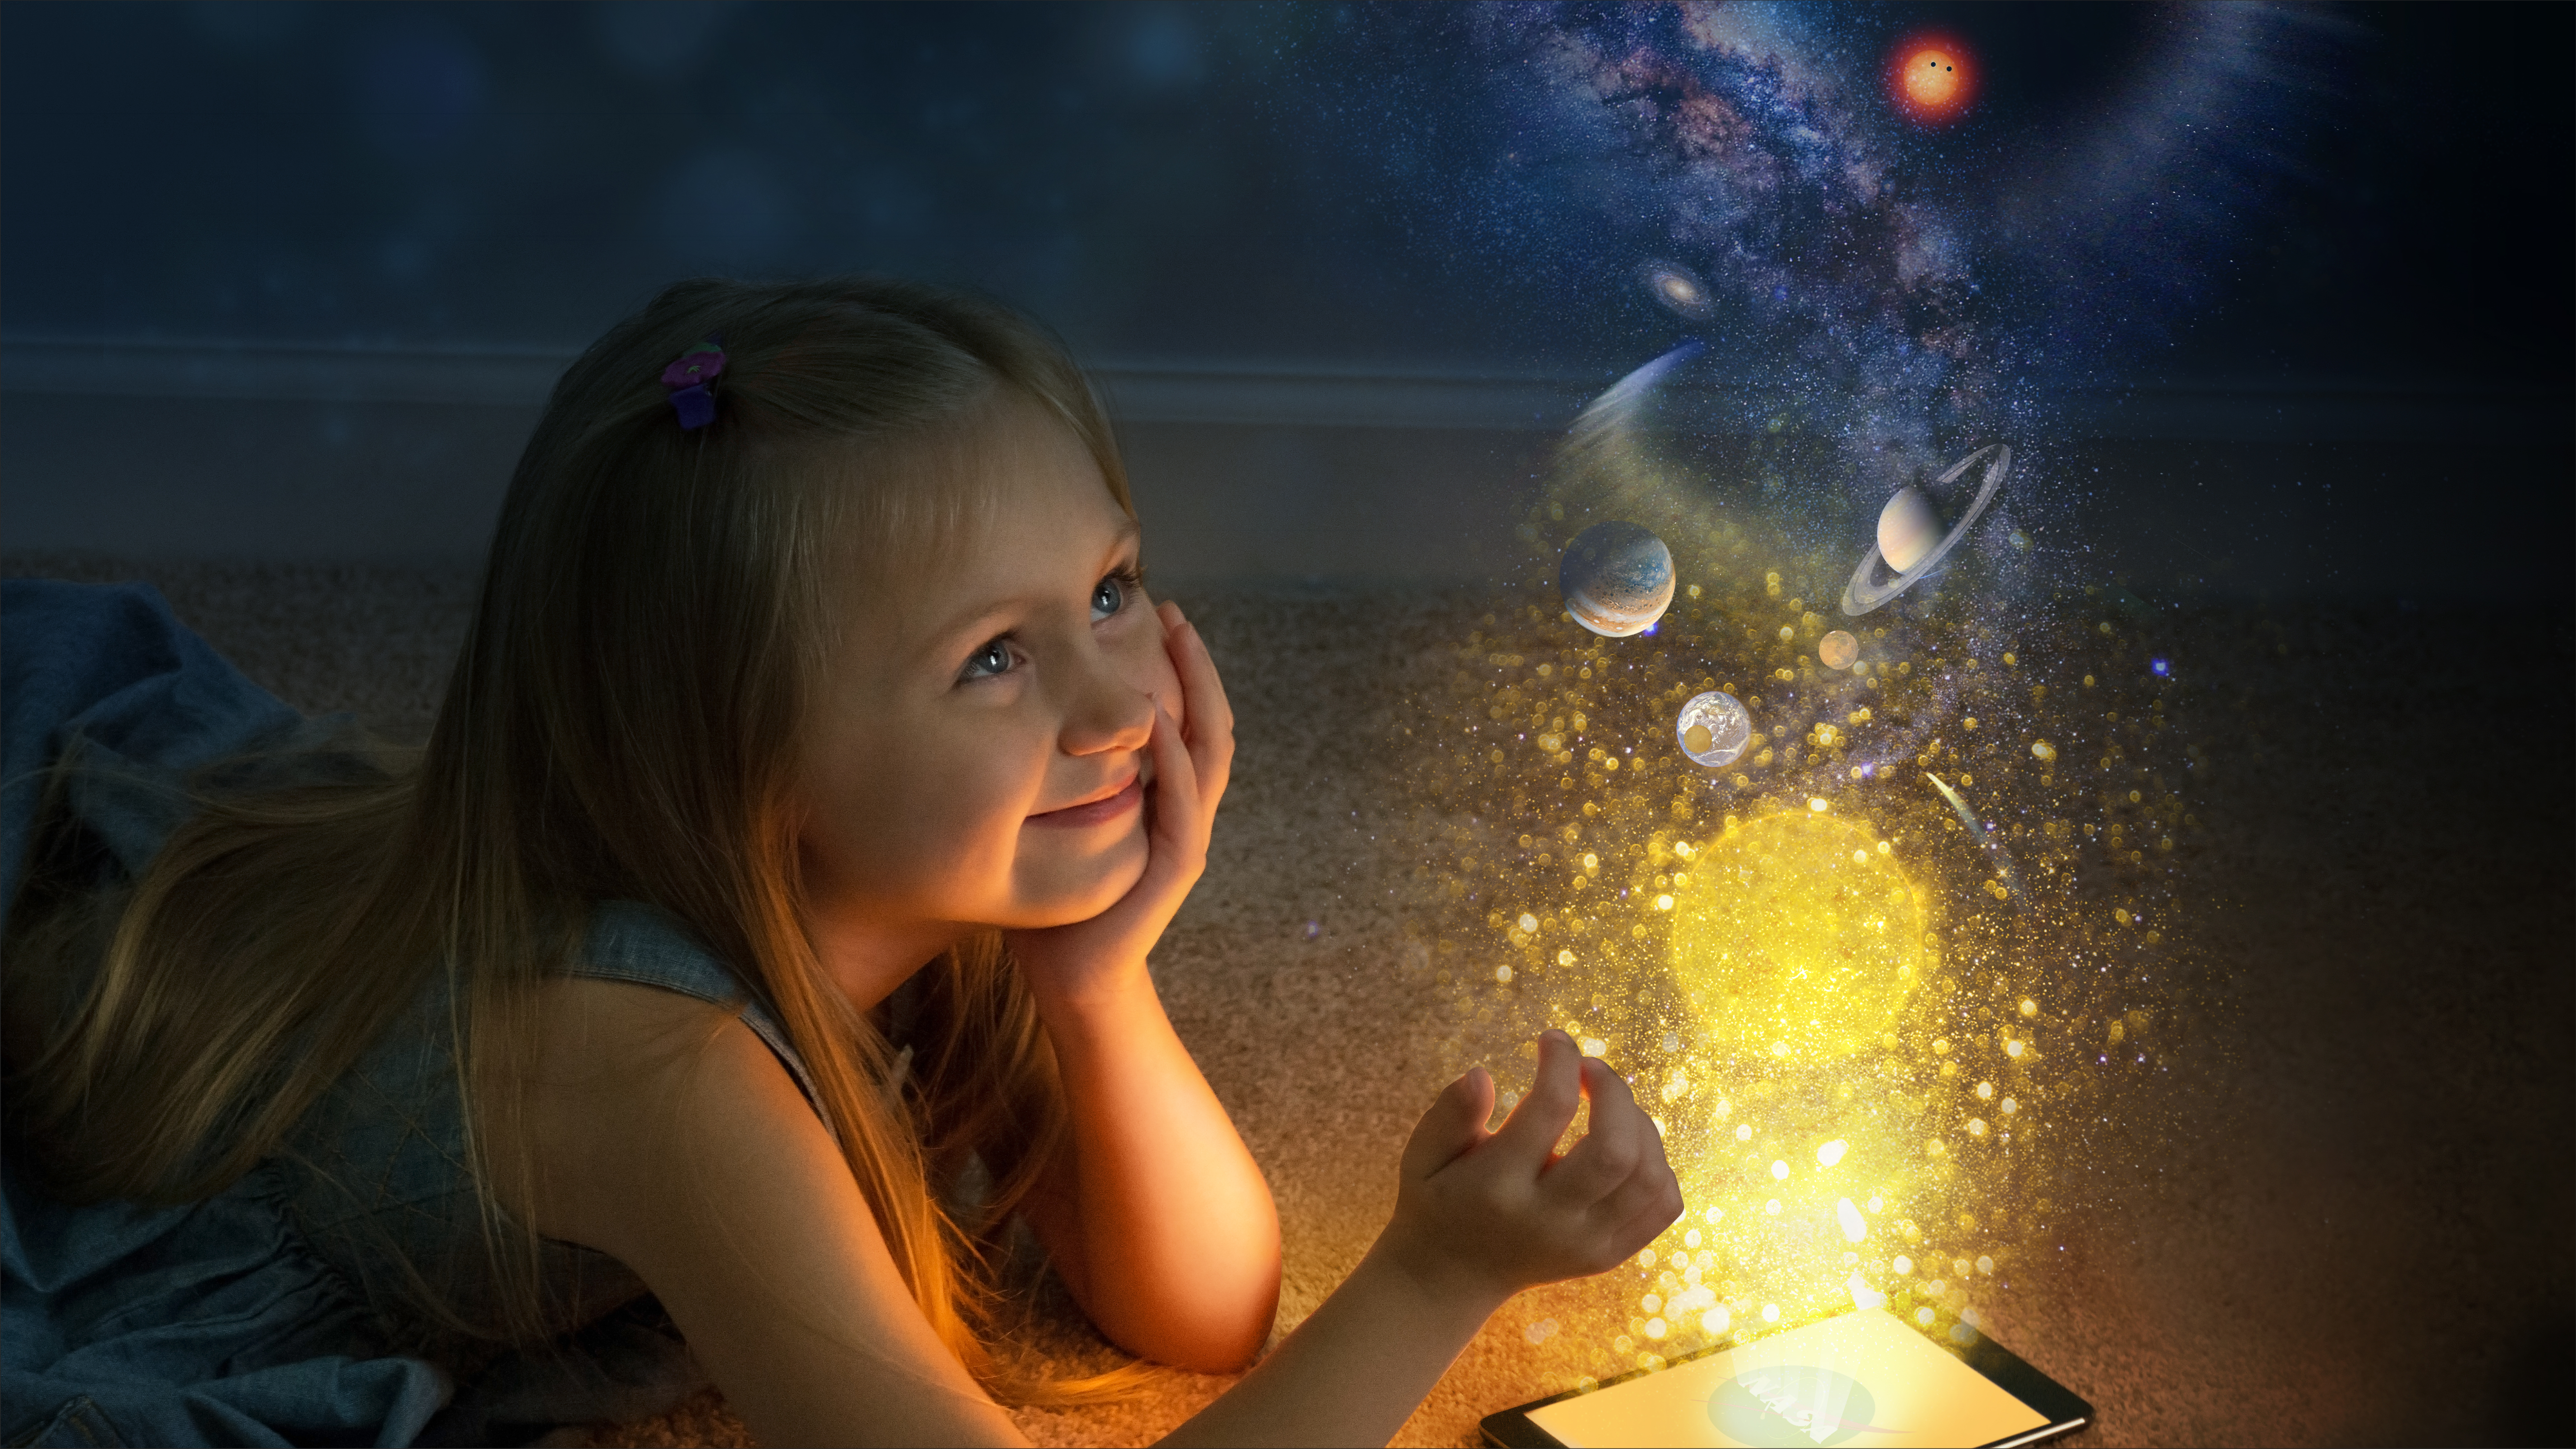 Little girl looking at a magical swirl of planets and galaxies.